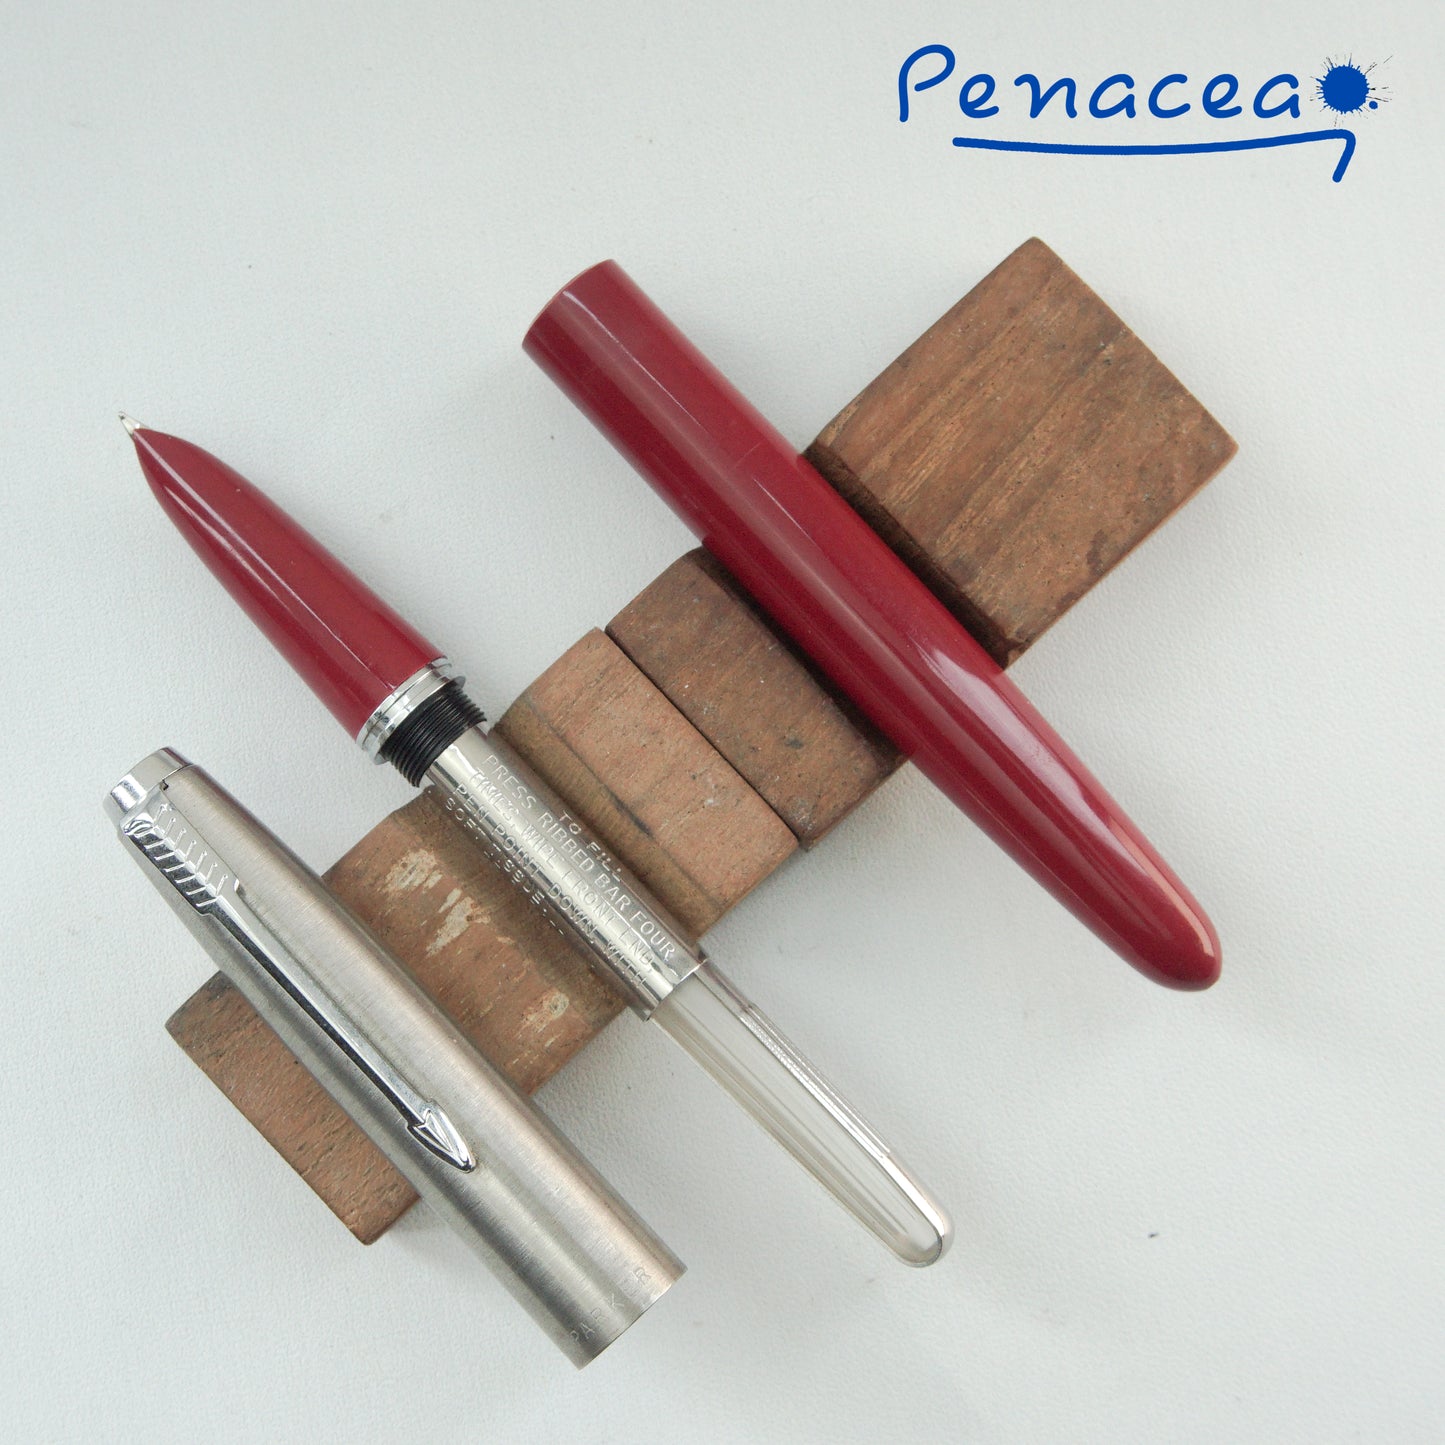 PARKER 21 RAGE RED FOUNTAIN PEN (1960s)